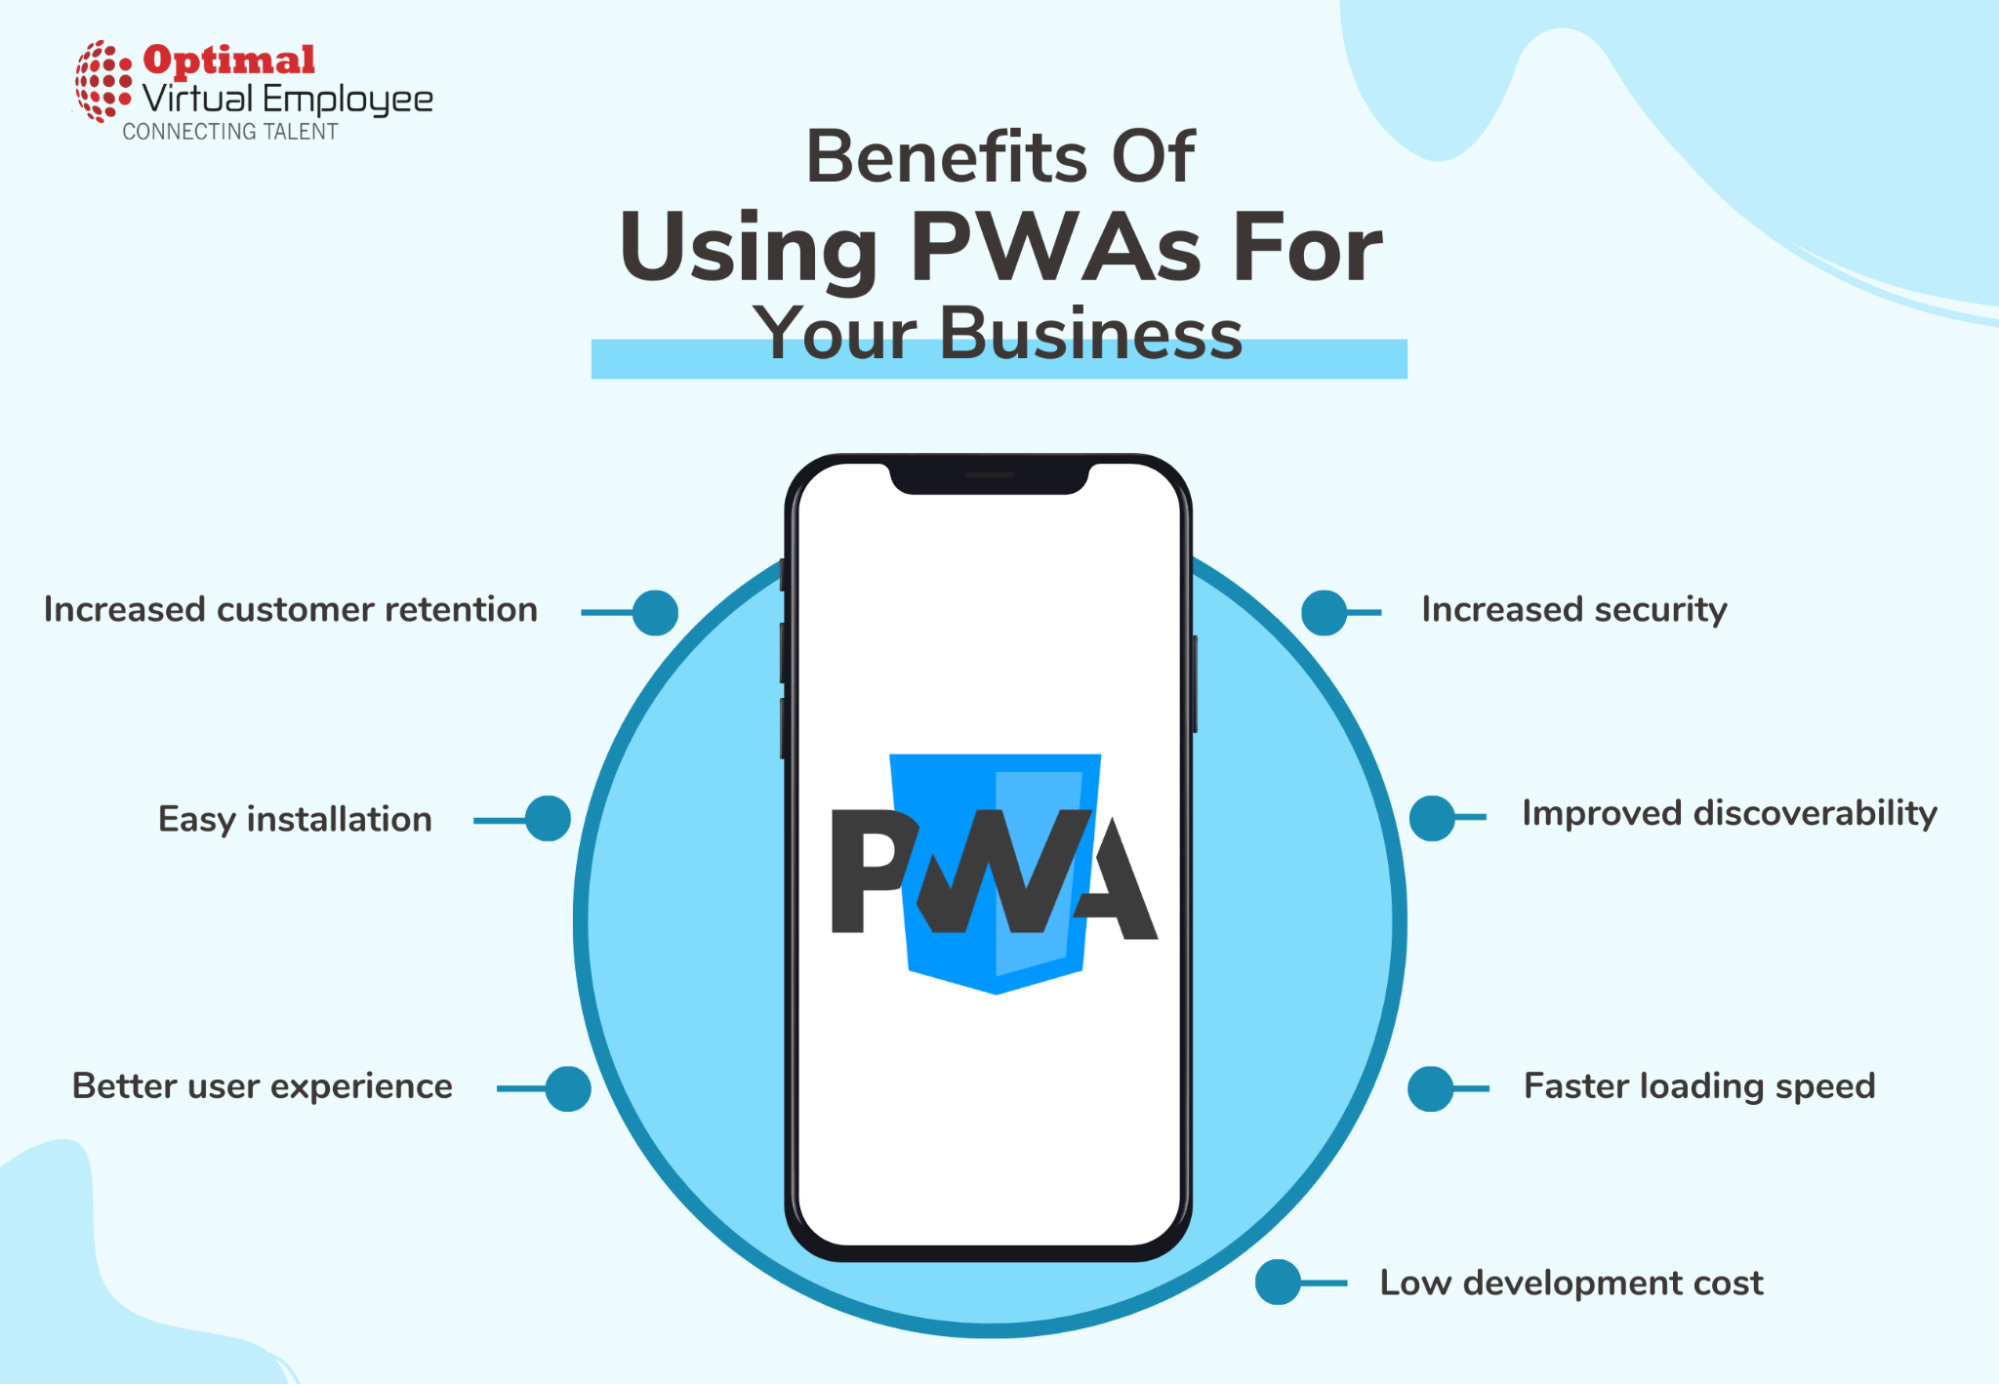 Benefits Of Using PWAs For Your Business